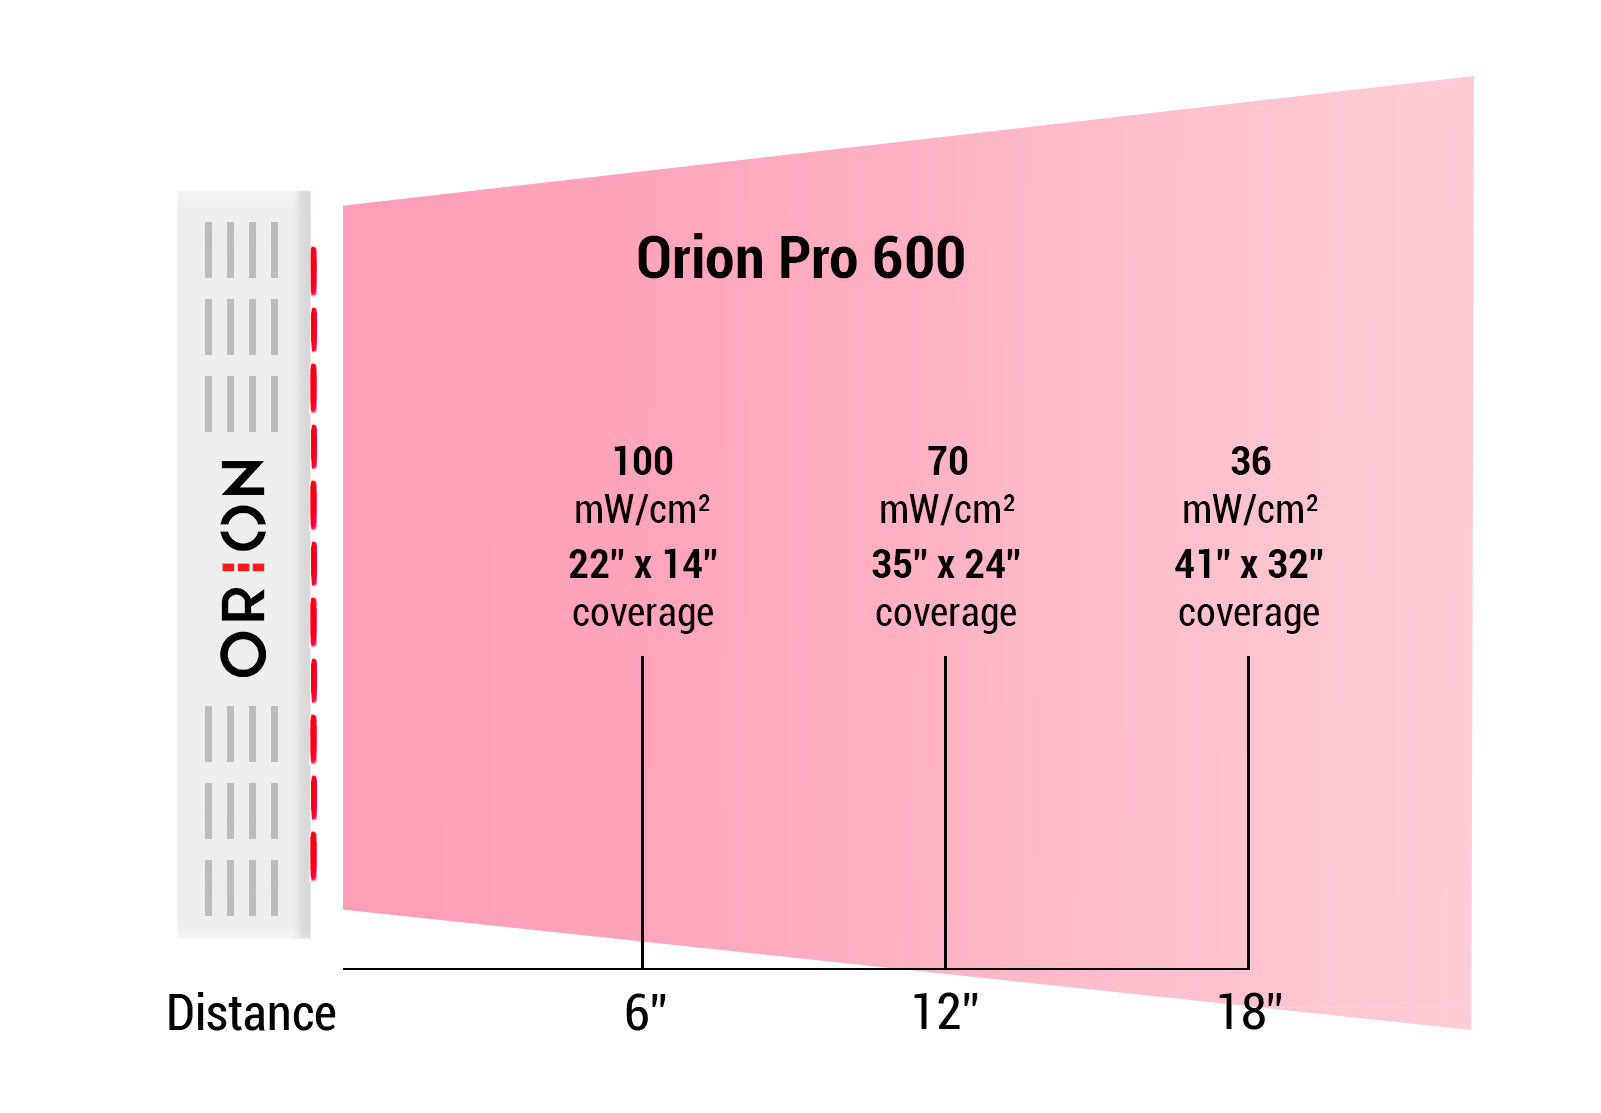 Orion Pro 600 Irradiance Levels | Orion Red Light Therapy